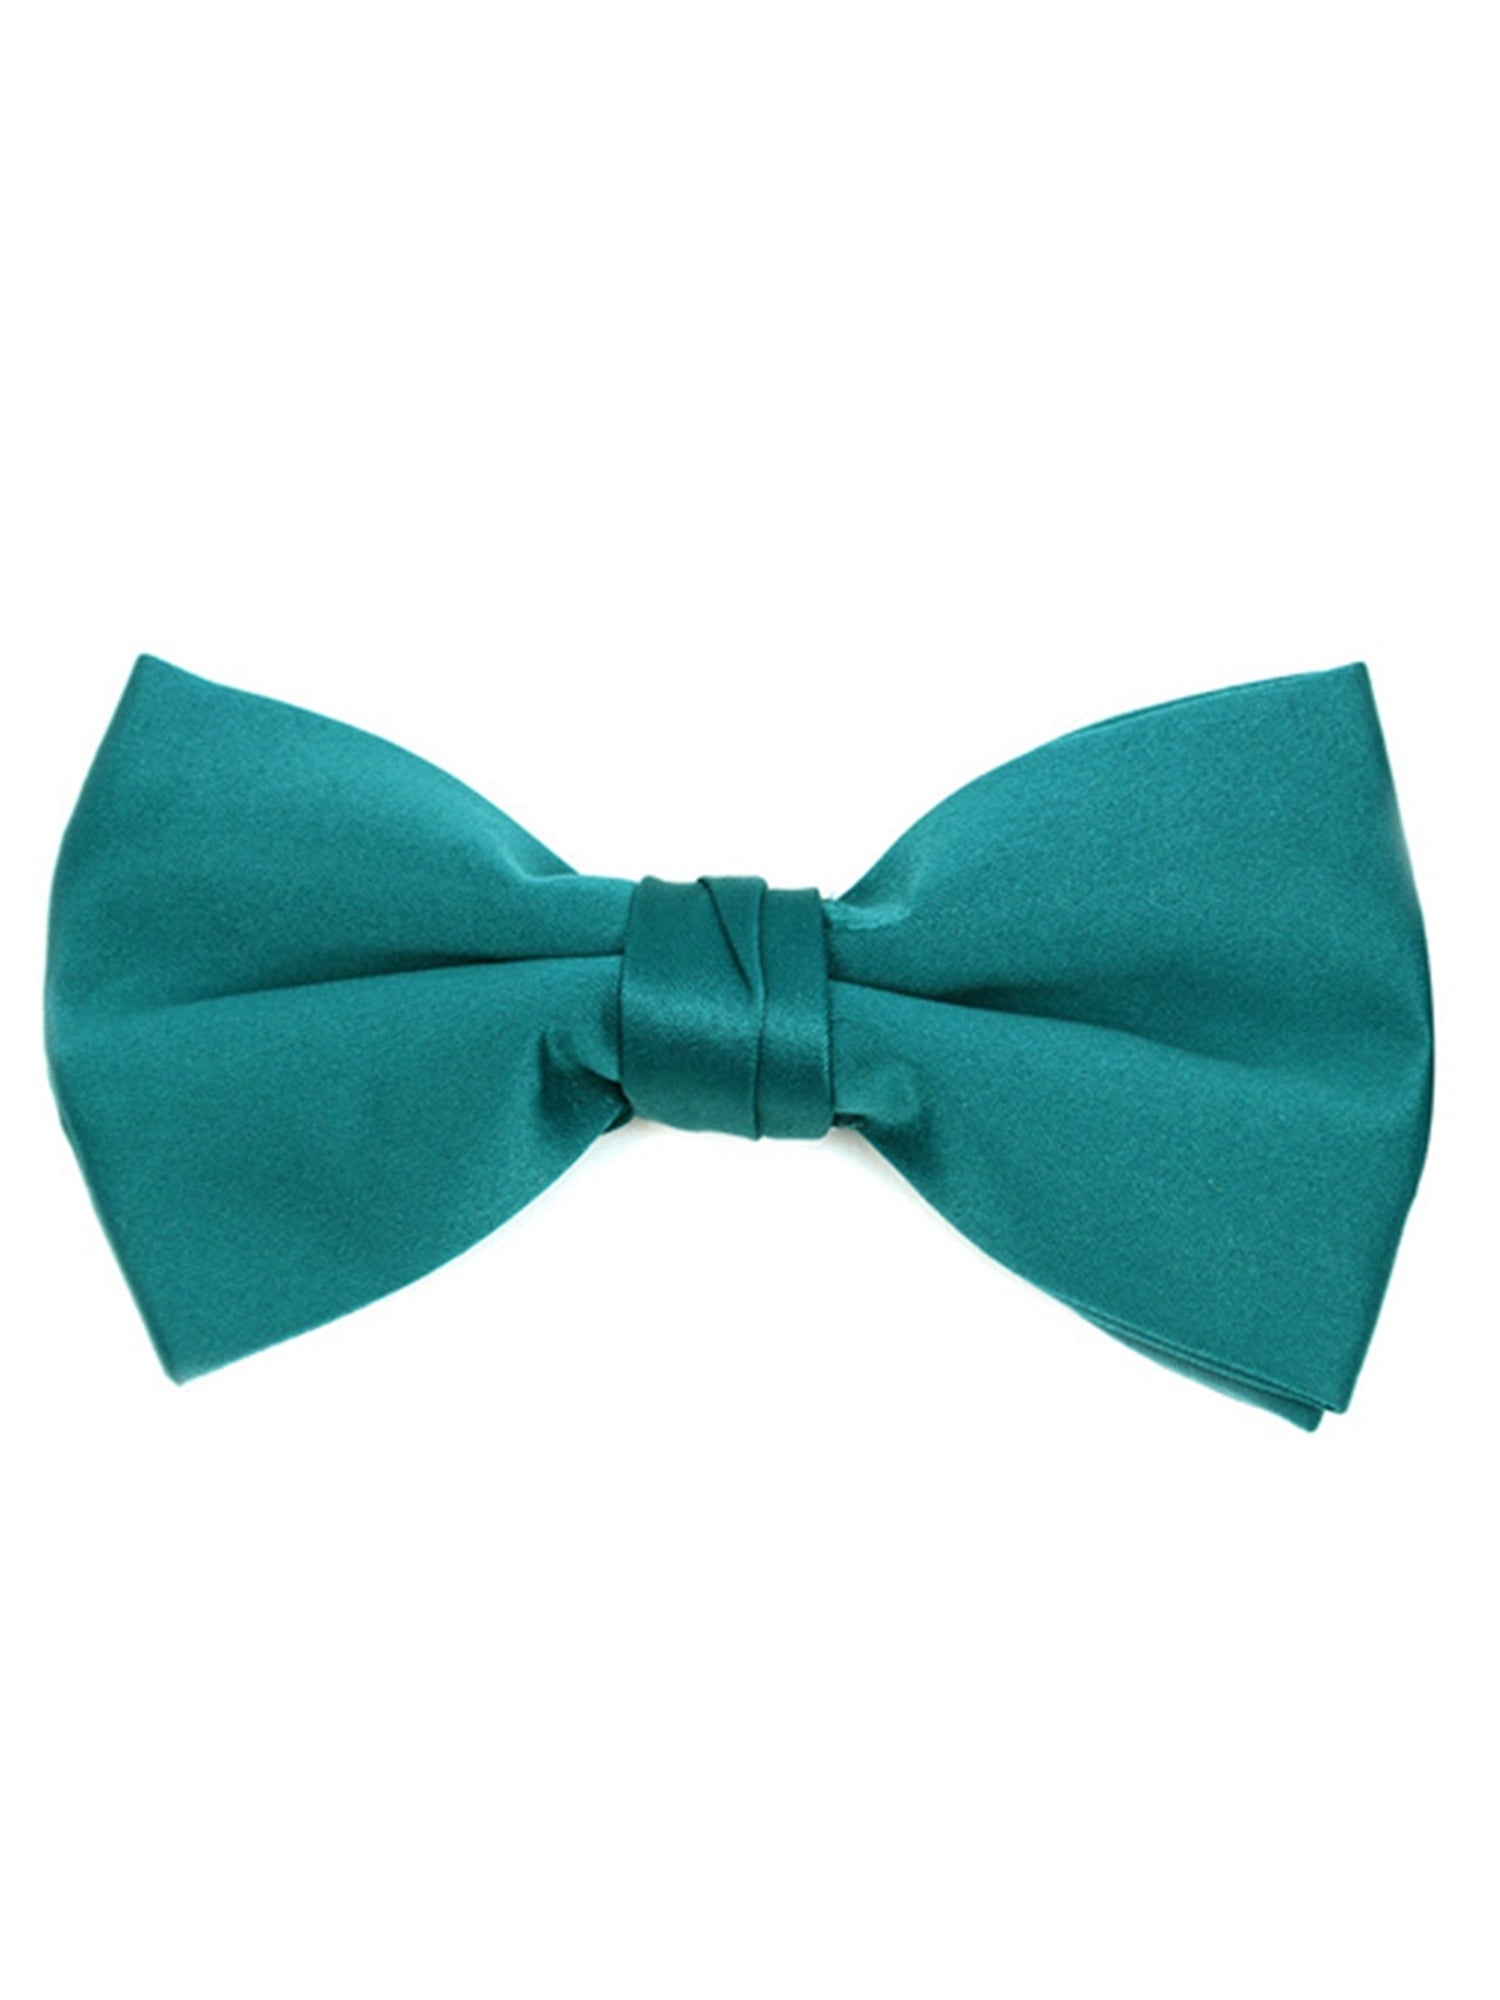 Men's Pre-tied Adjustable Length Bow Tie - Formal Tuxedo Solid Color Men's Solid Color Bow Tie TheDapperTie Teal One Size 